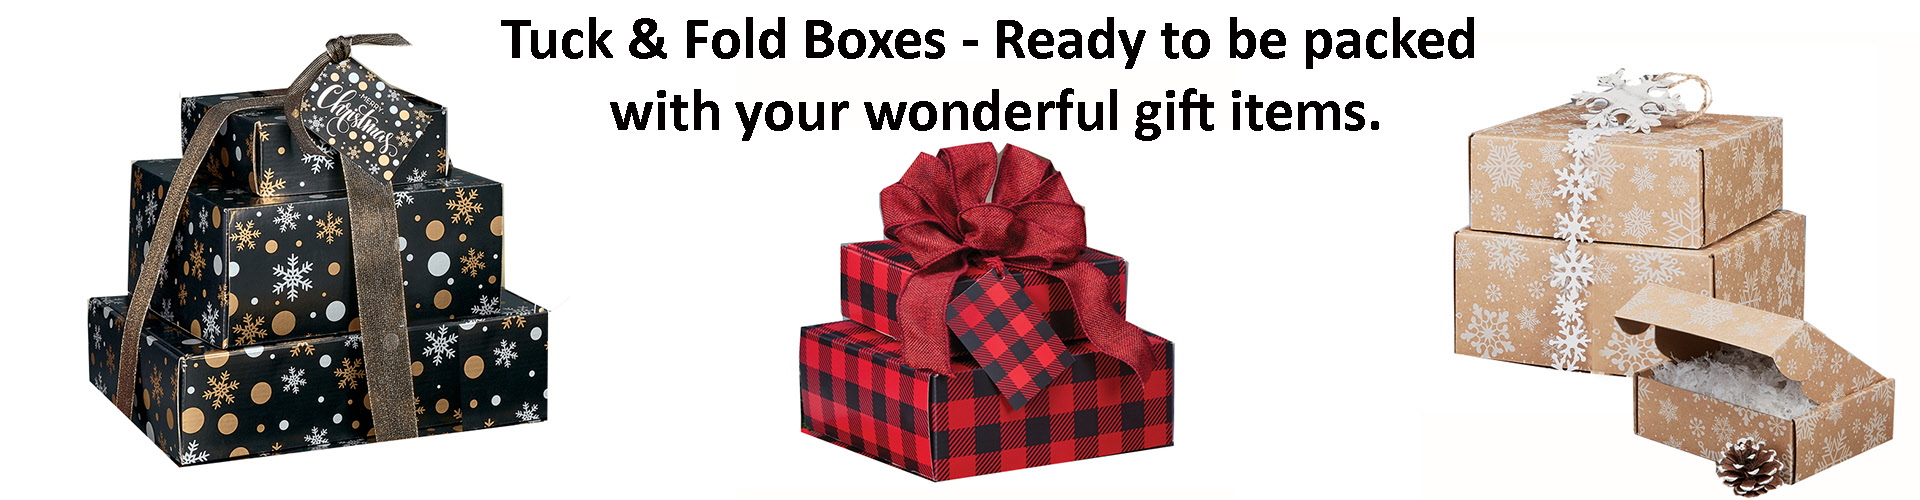 Boxes for Gourmet Foods and Gift Packaging